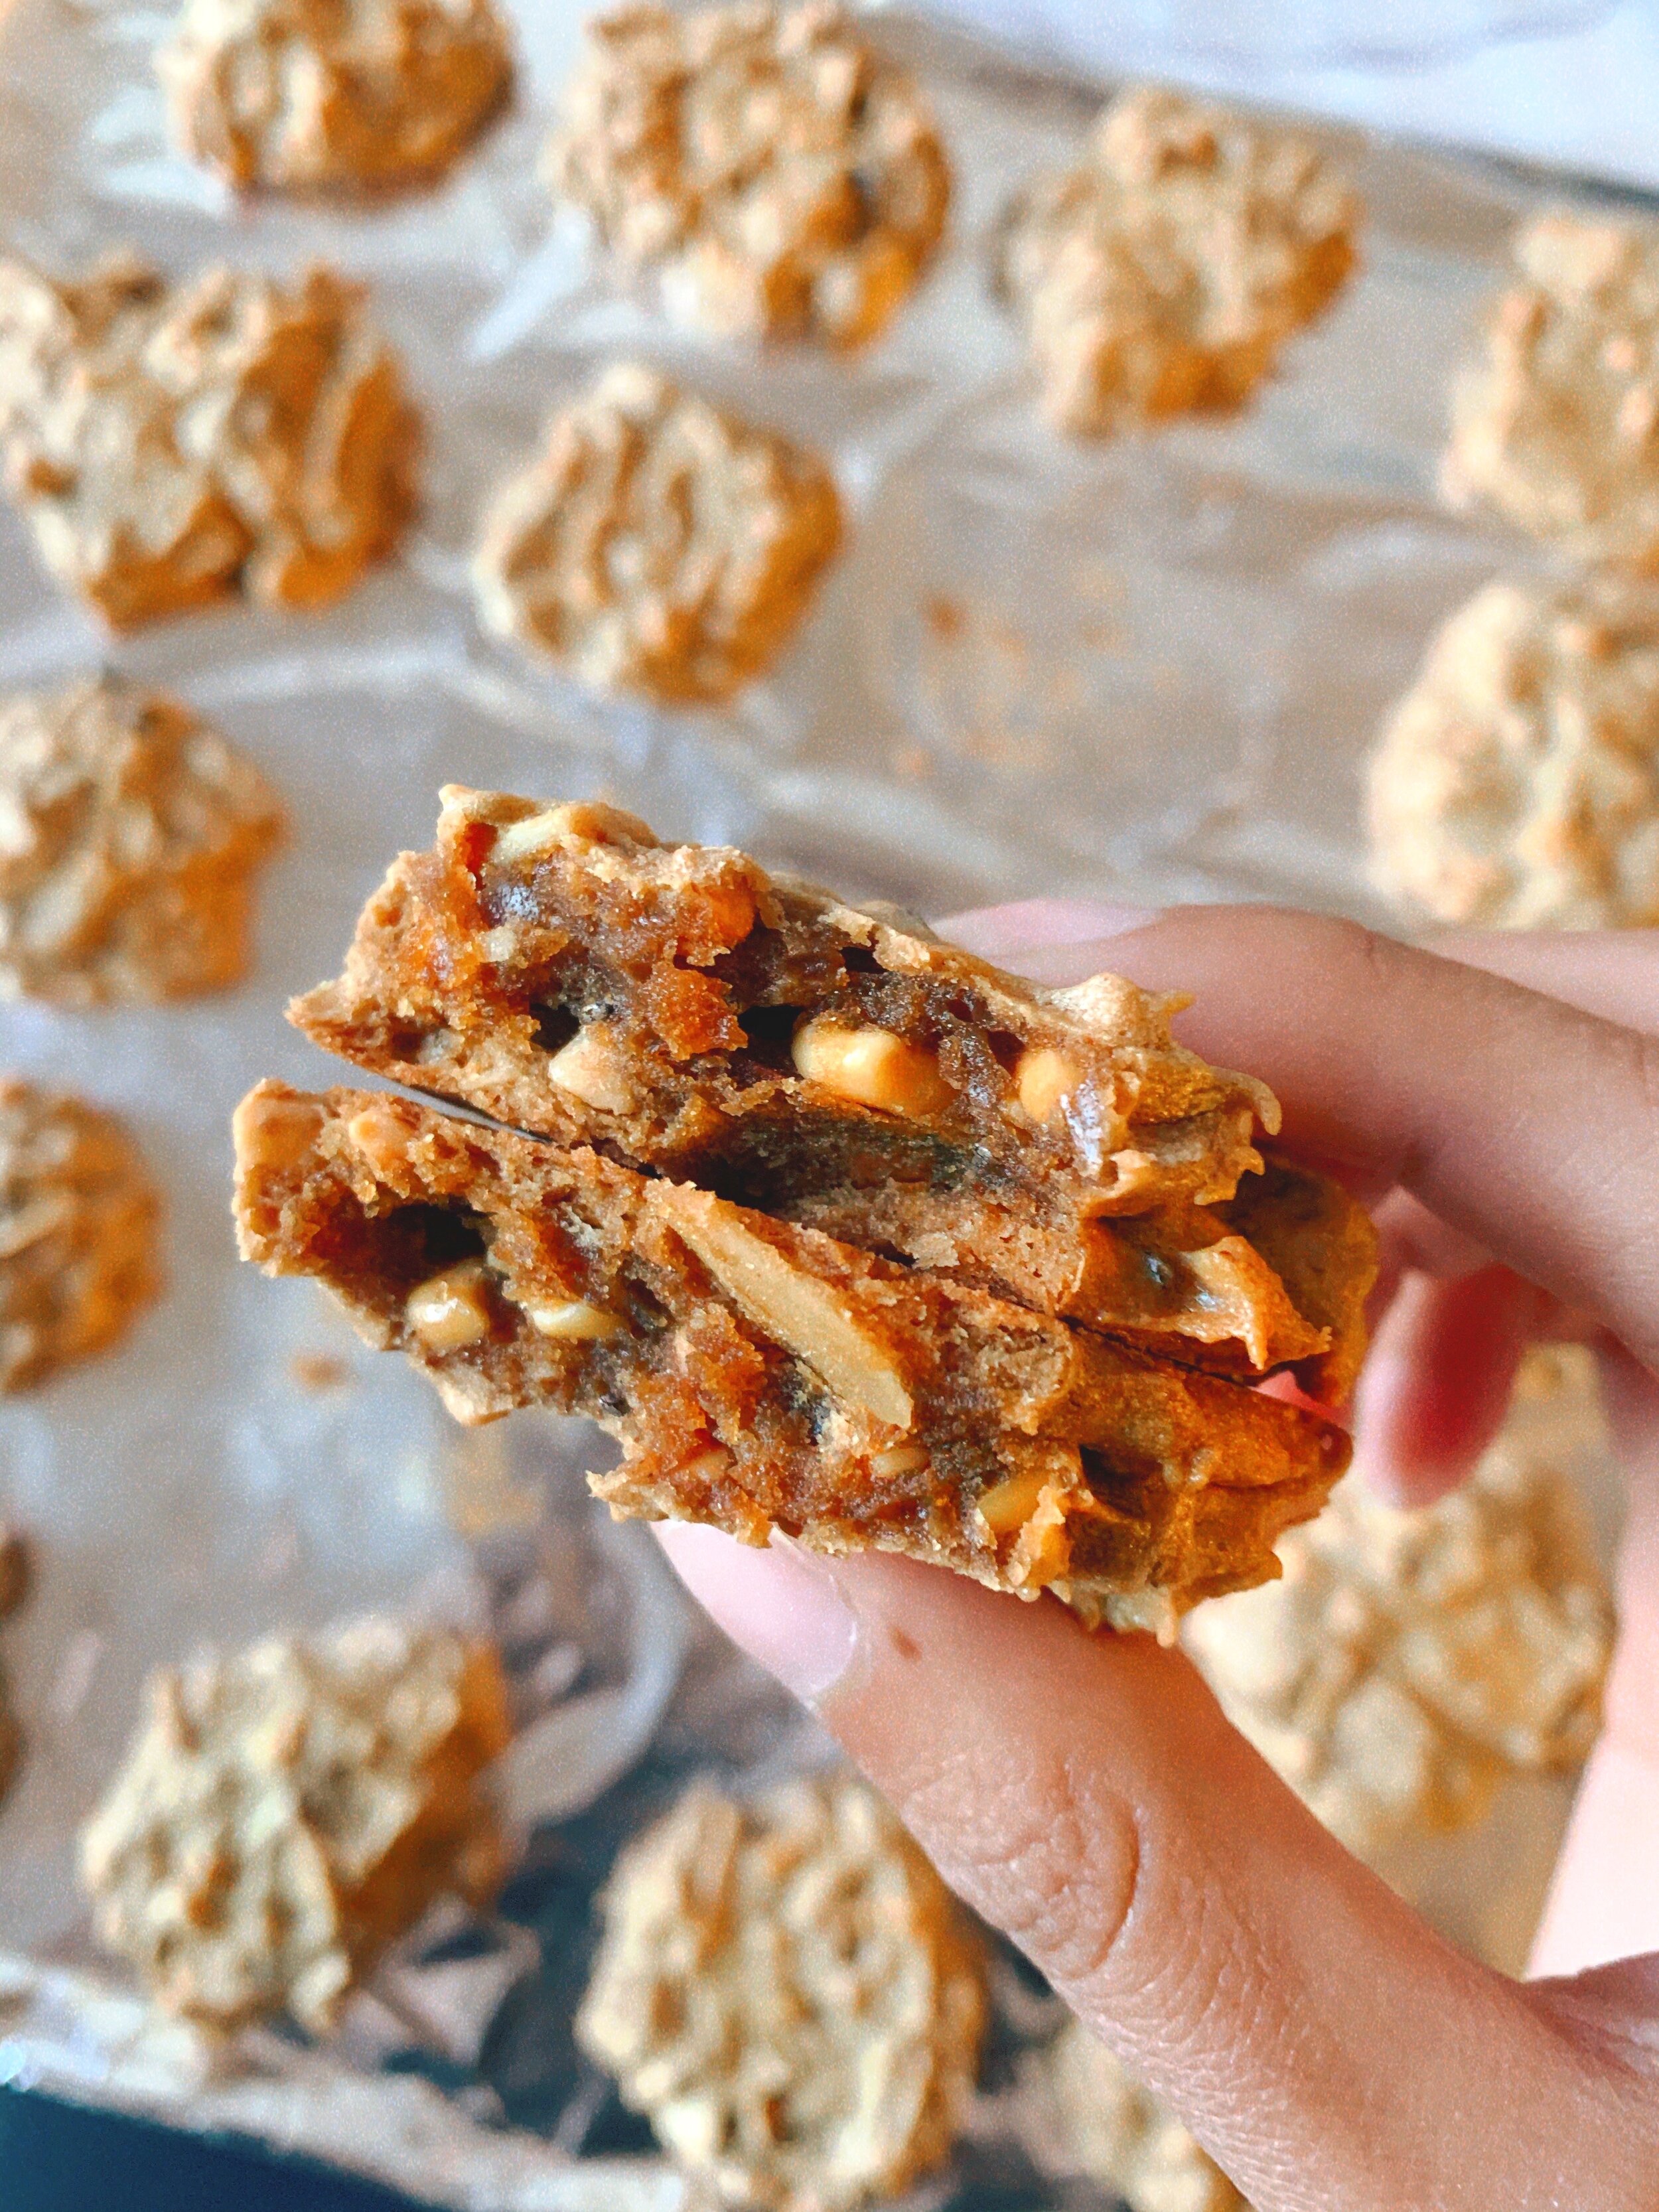 Inside of a freshly baked 3-ingredient peanut butter cookie